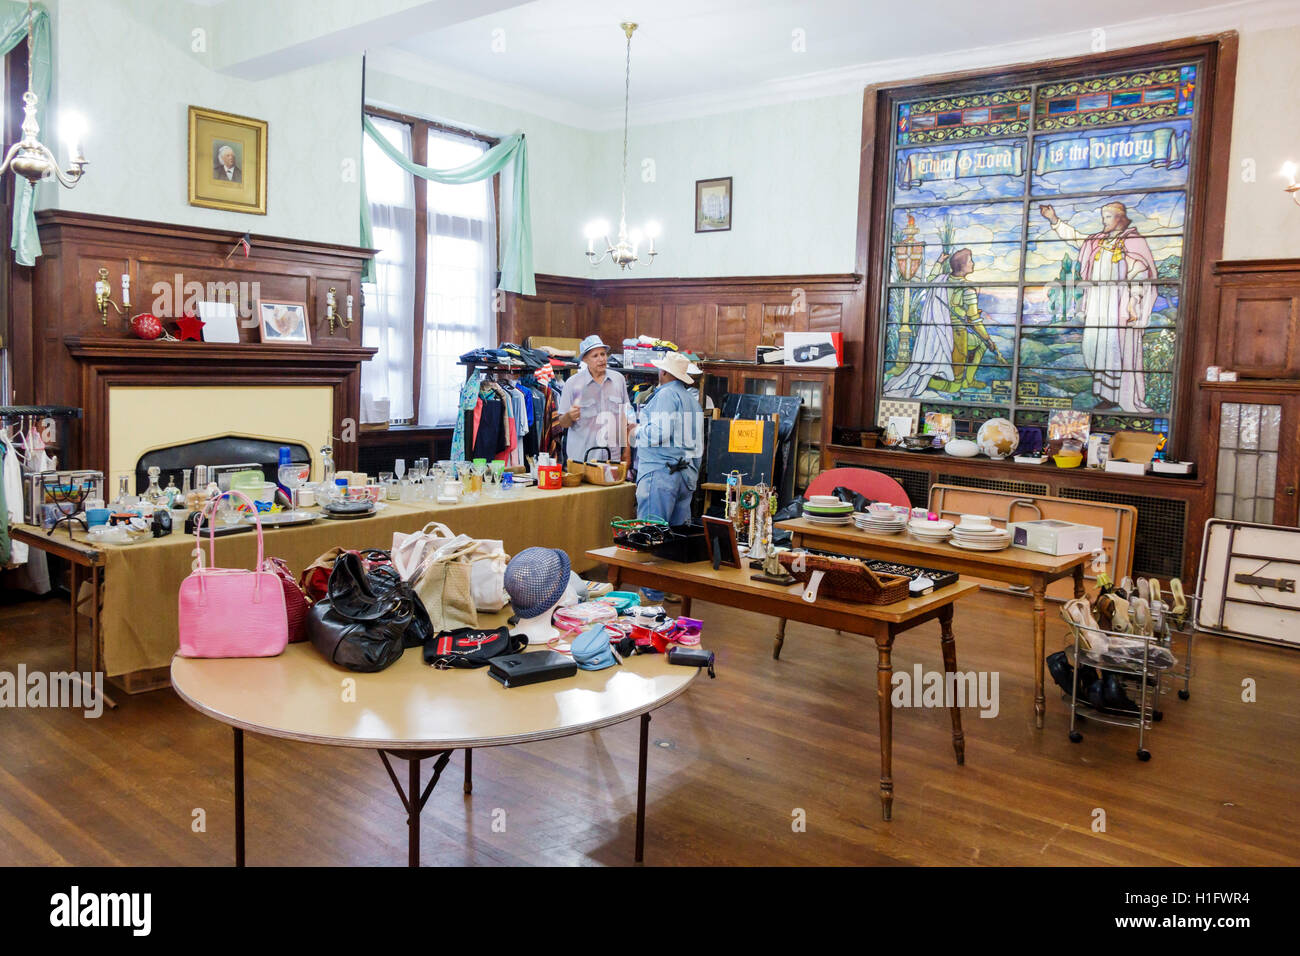 New York City,NY NYC Brooklyn,Fort Greene Flea Market,Cadman Congregational Church,rummage sale,vintage clothes,accessories,housewares,display table,s Stock Photo